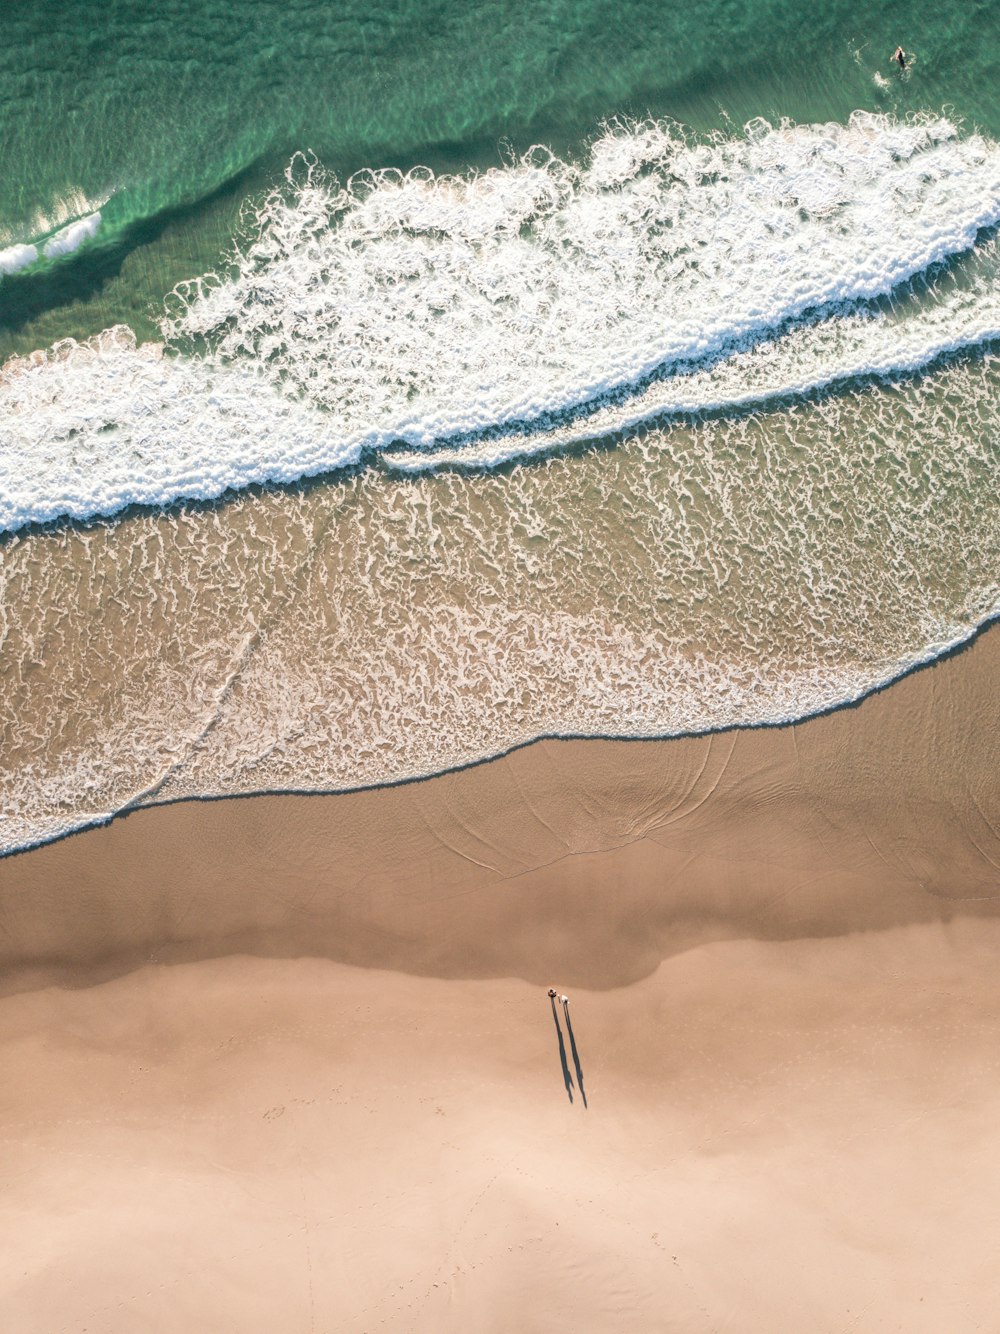 Drone Beach Pictures | Download Images on